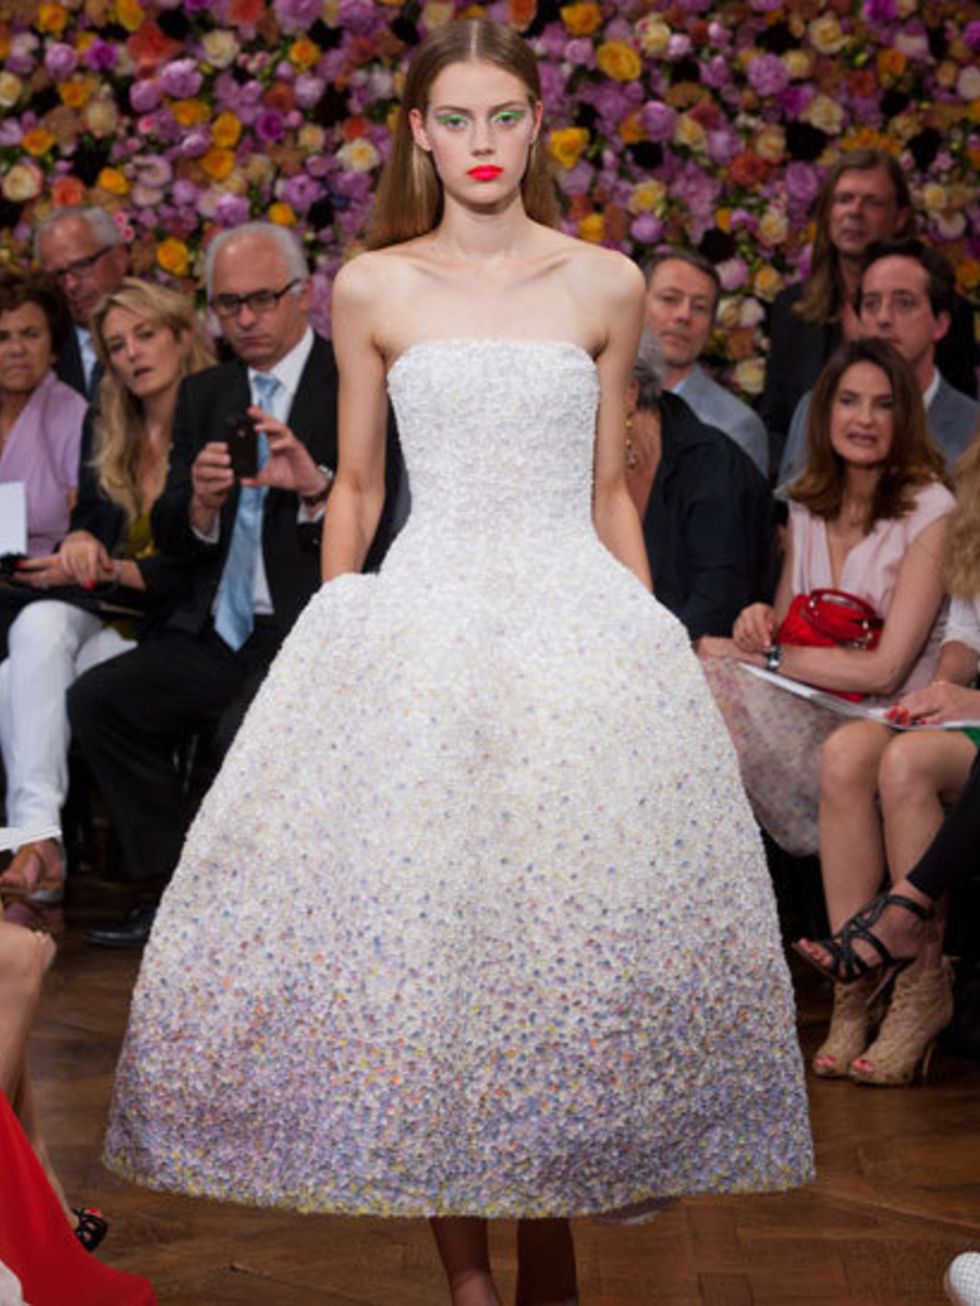 Natalie Portman wears Christian Dior Couture Autumn Winter 2012 by